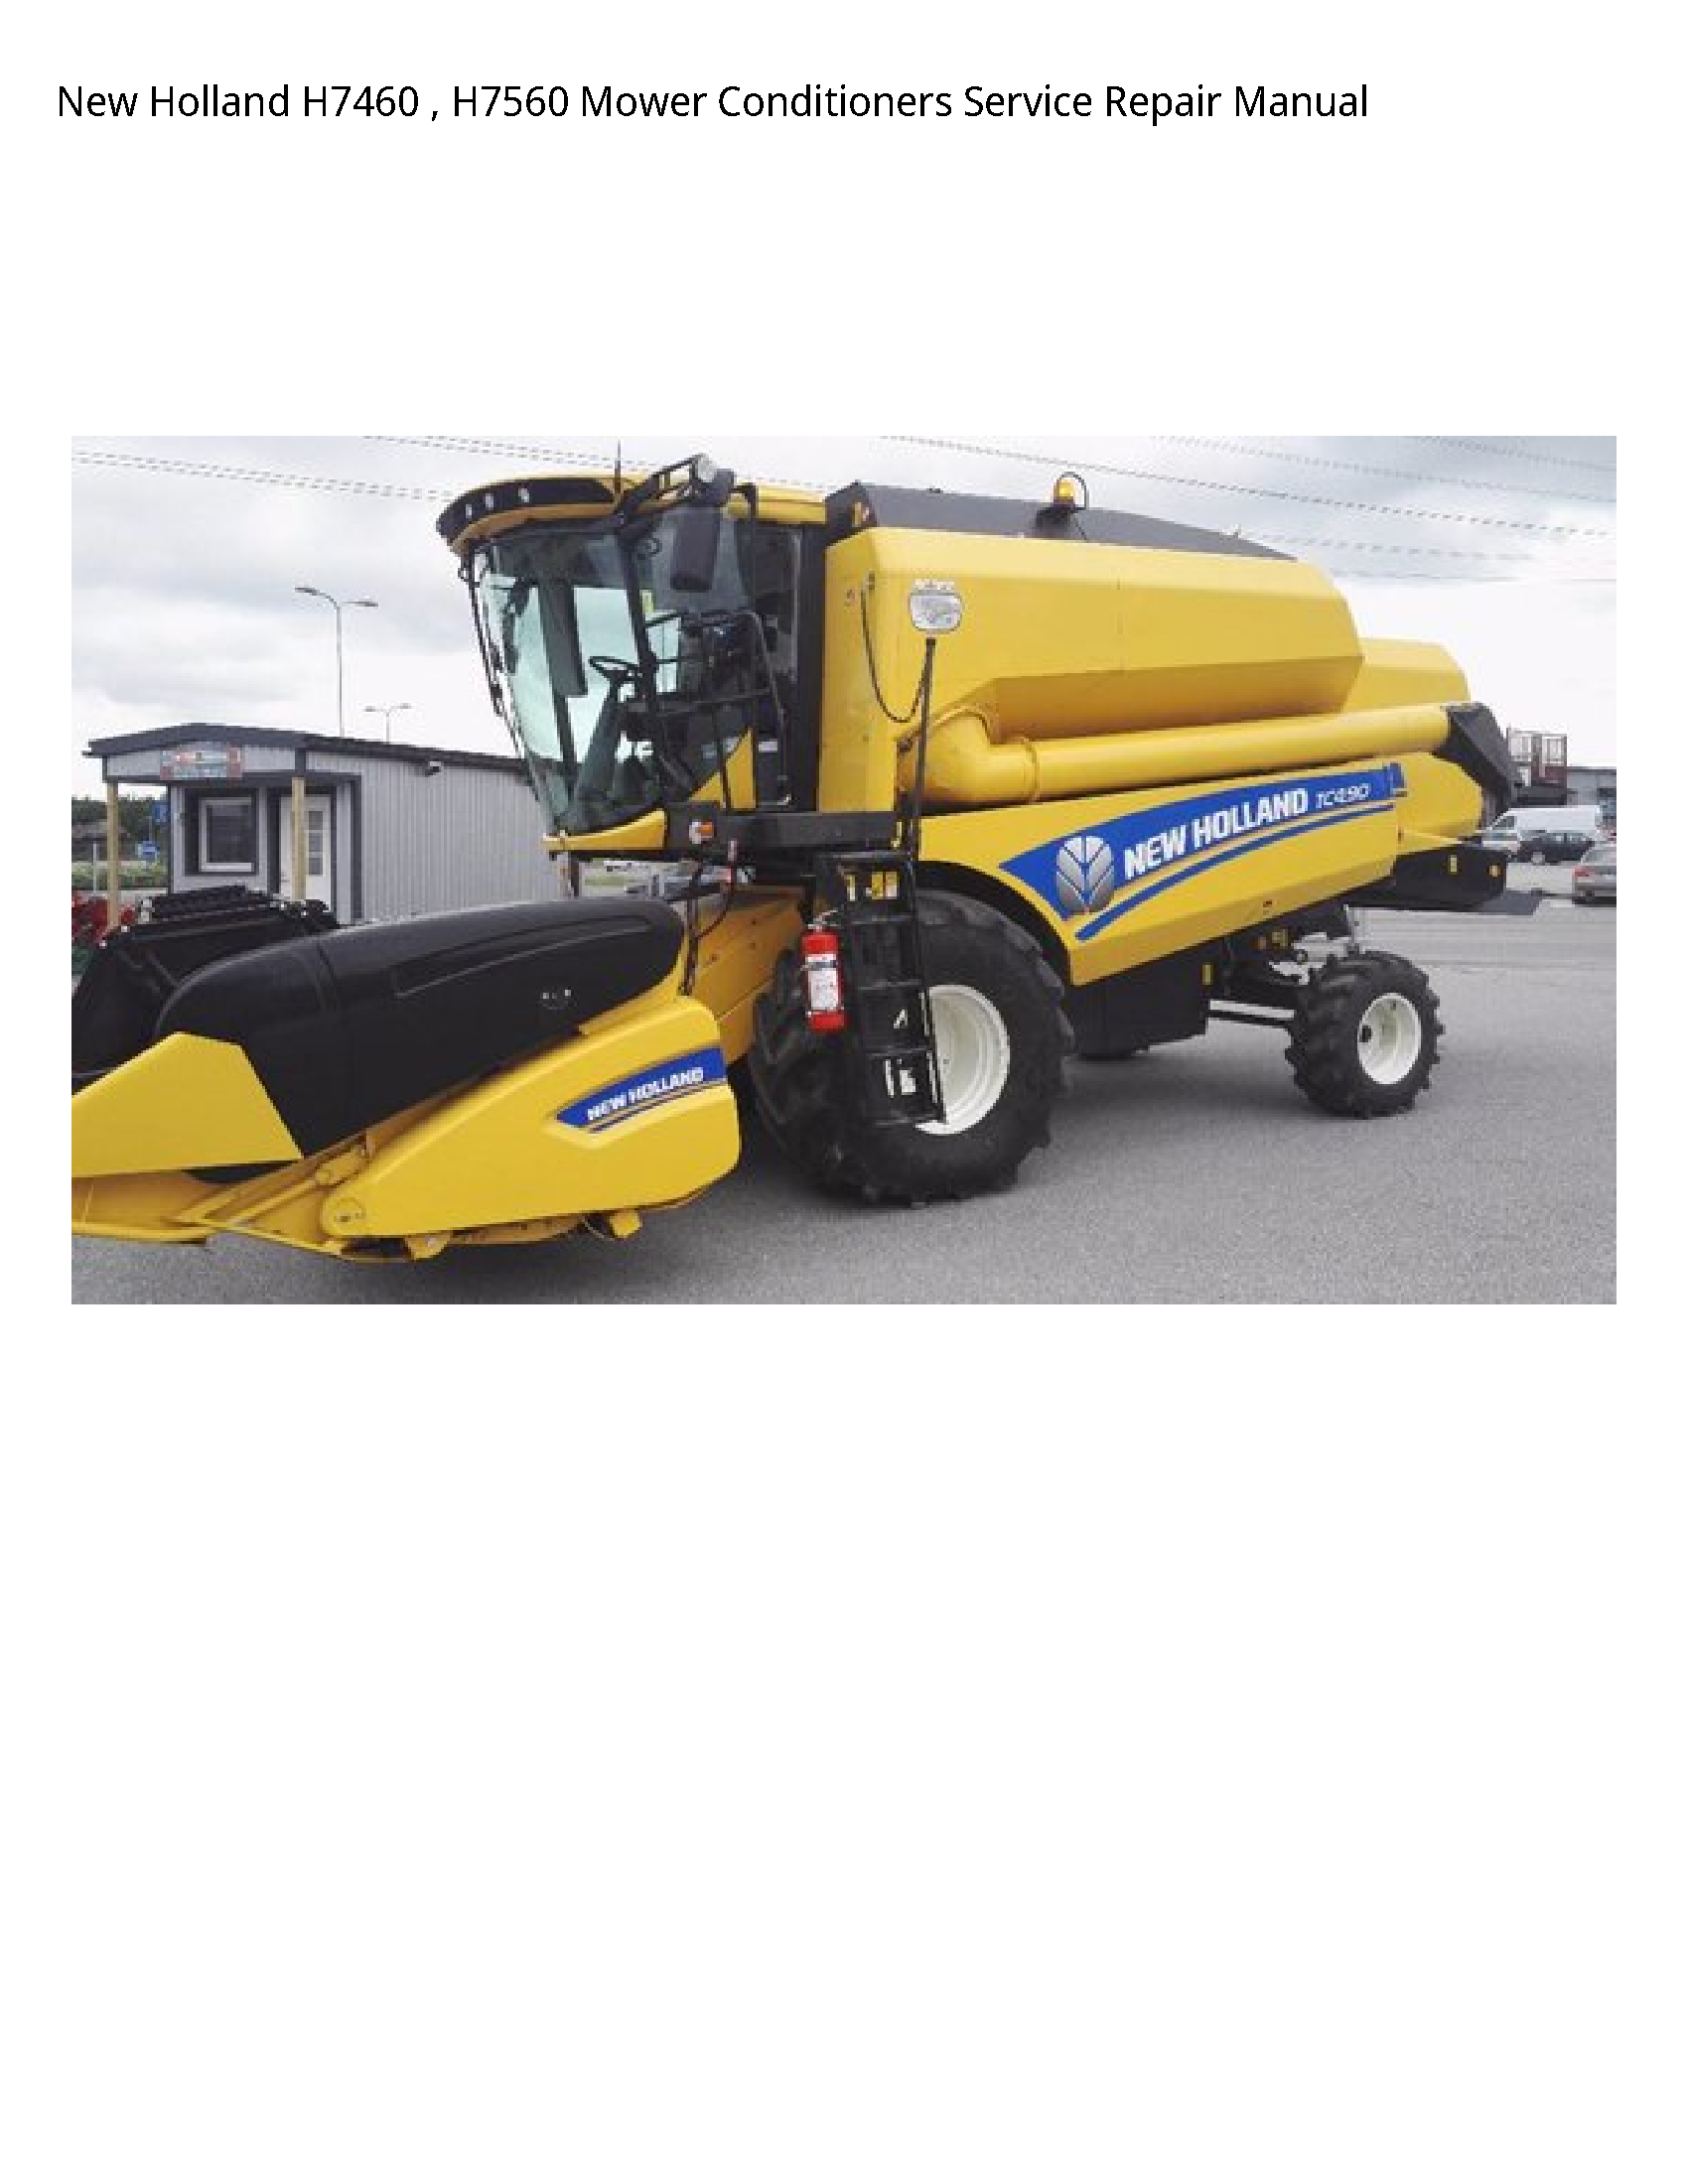 New Holland H7460 Mower Conditioners manual